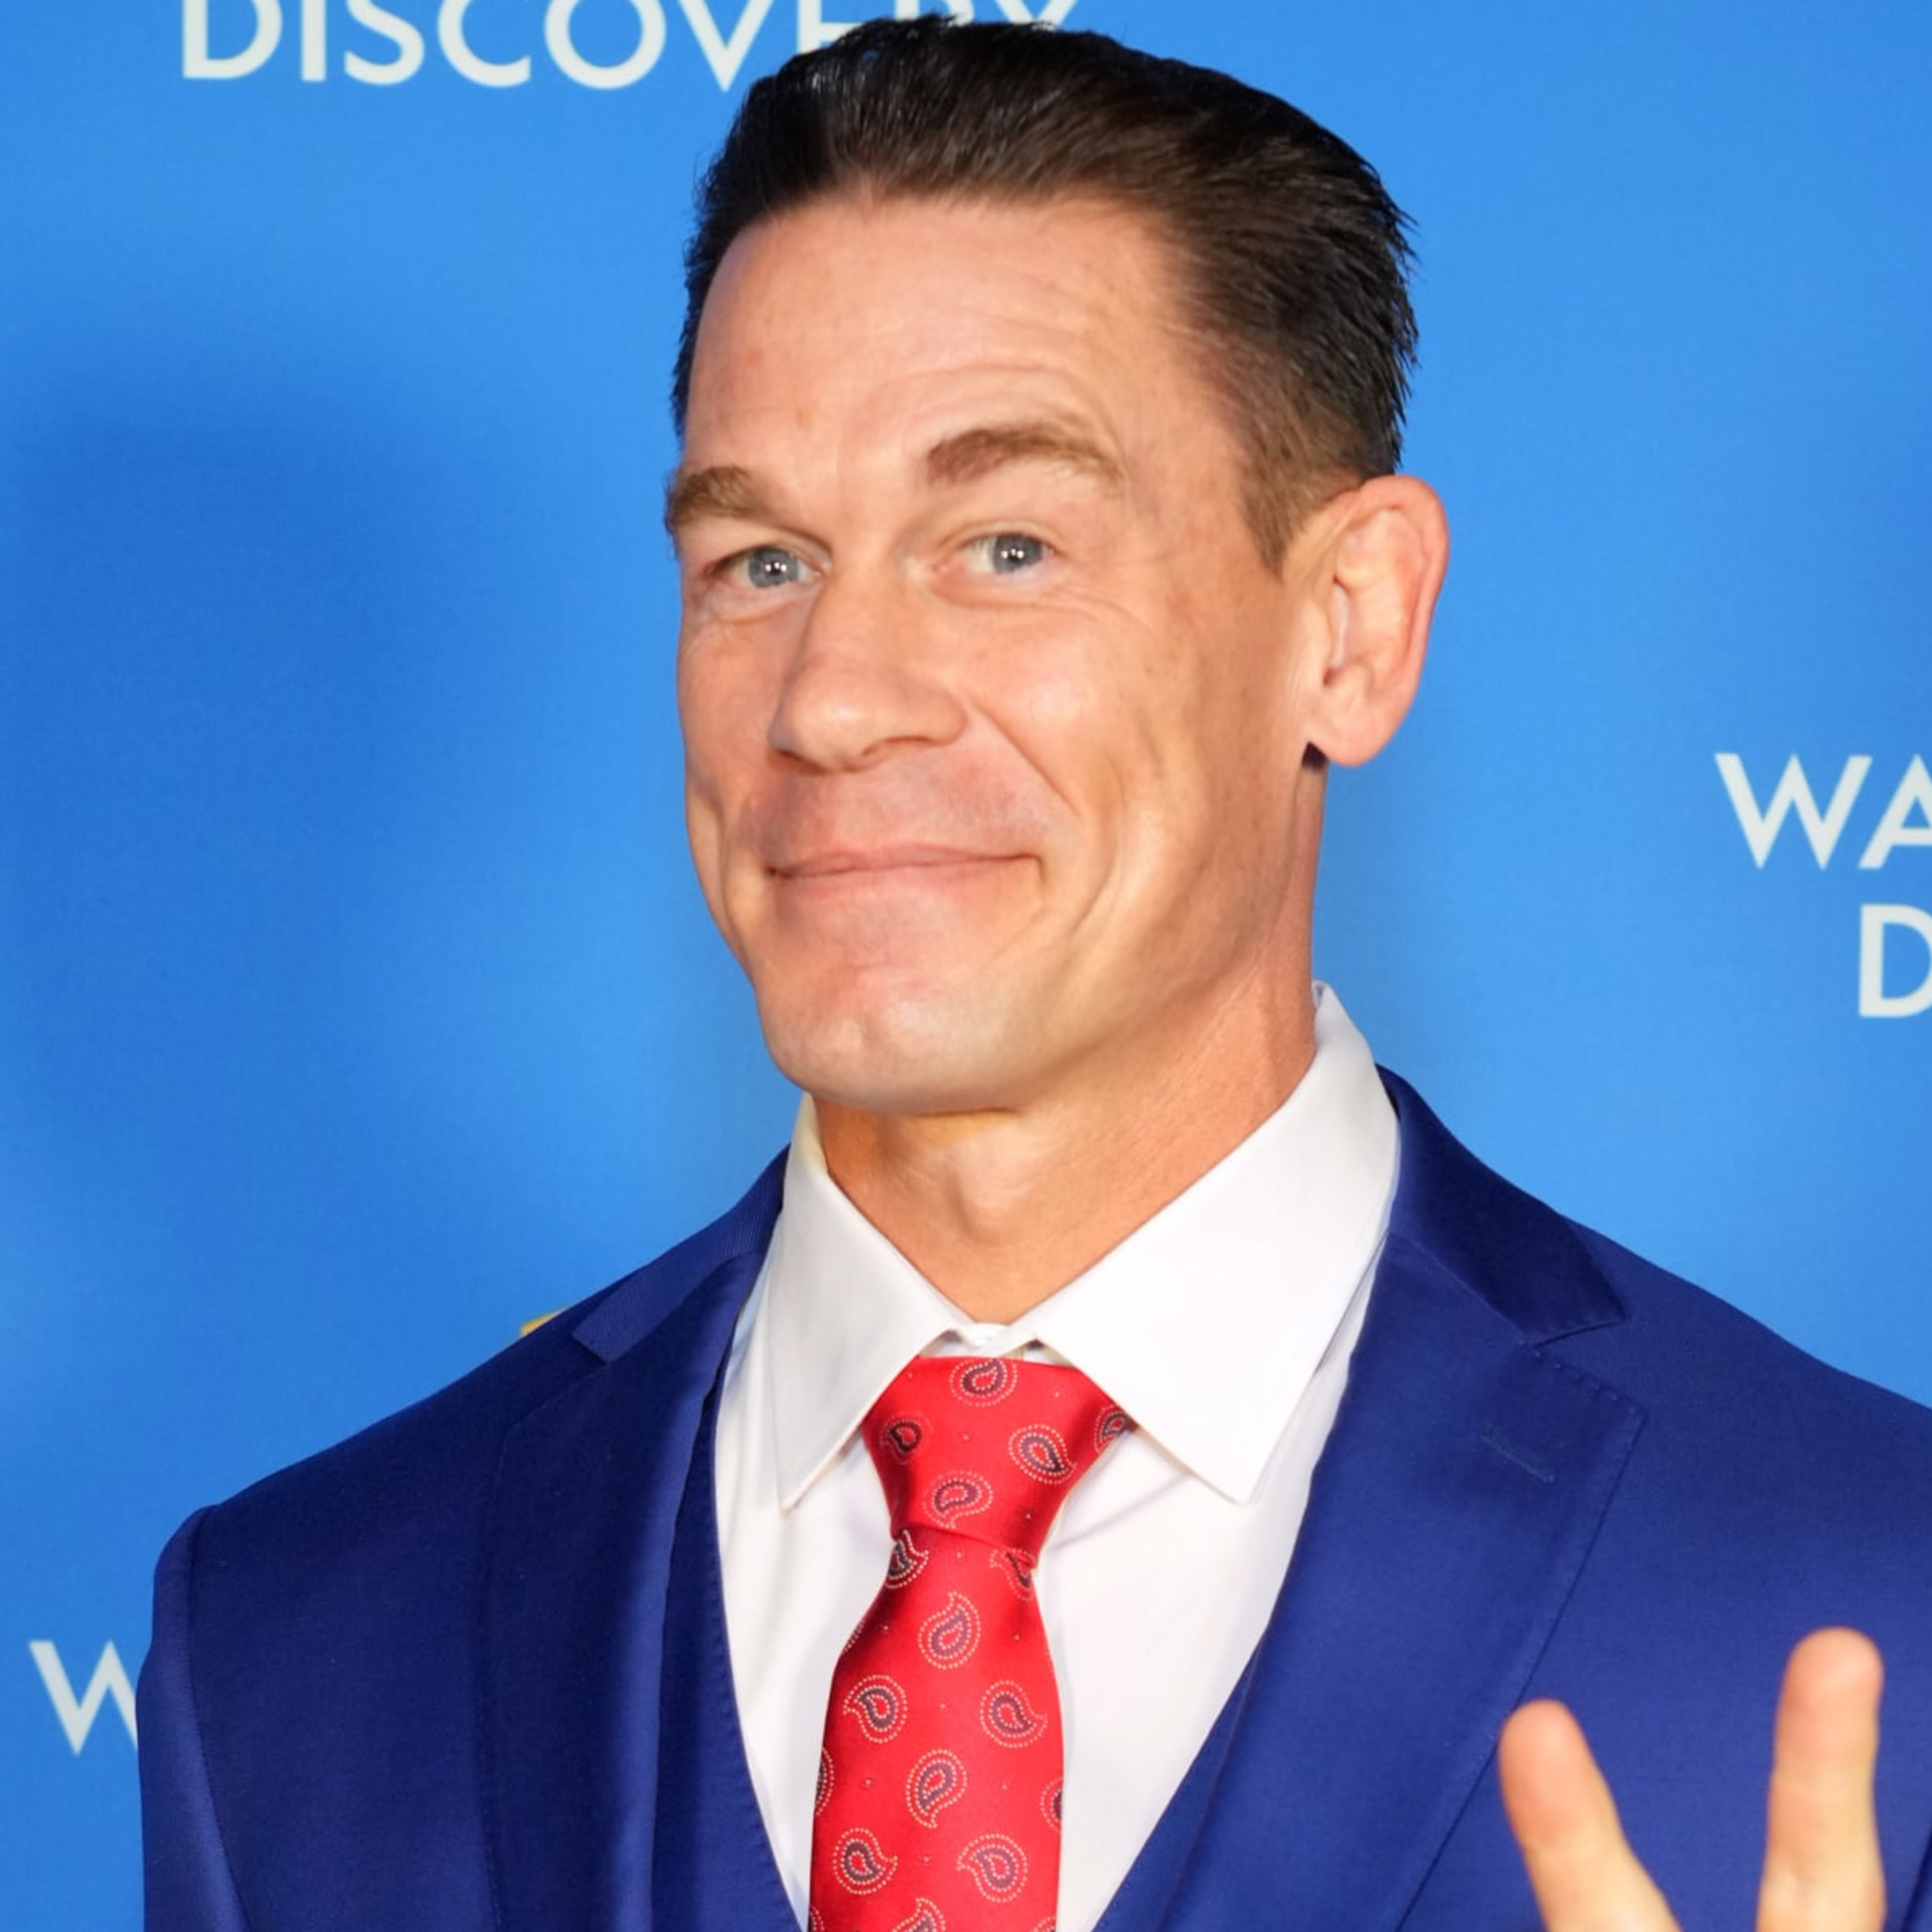 WWE Legend John Cena Joins Fortnite Video Game as Playable Character